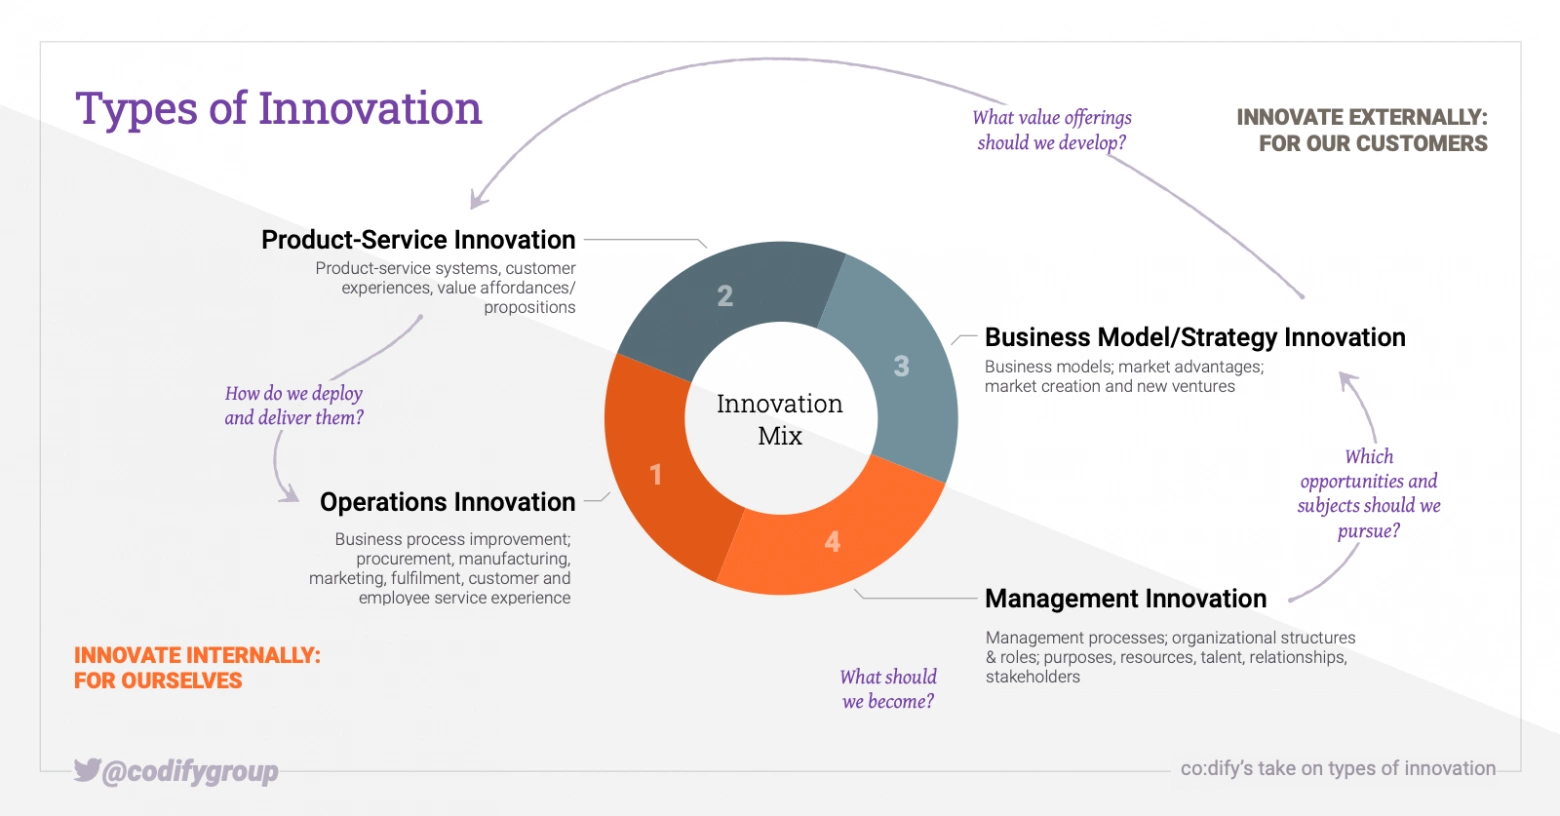 A simple way to classify the types of innovation